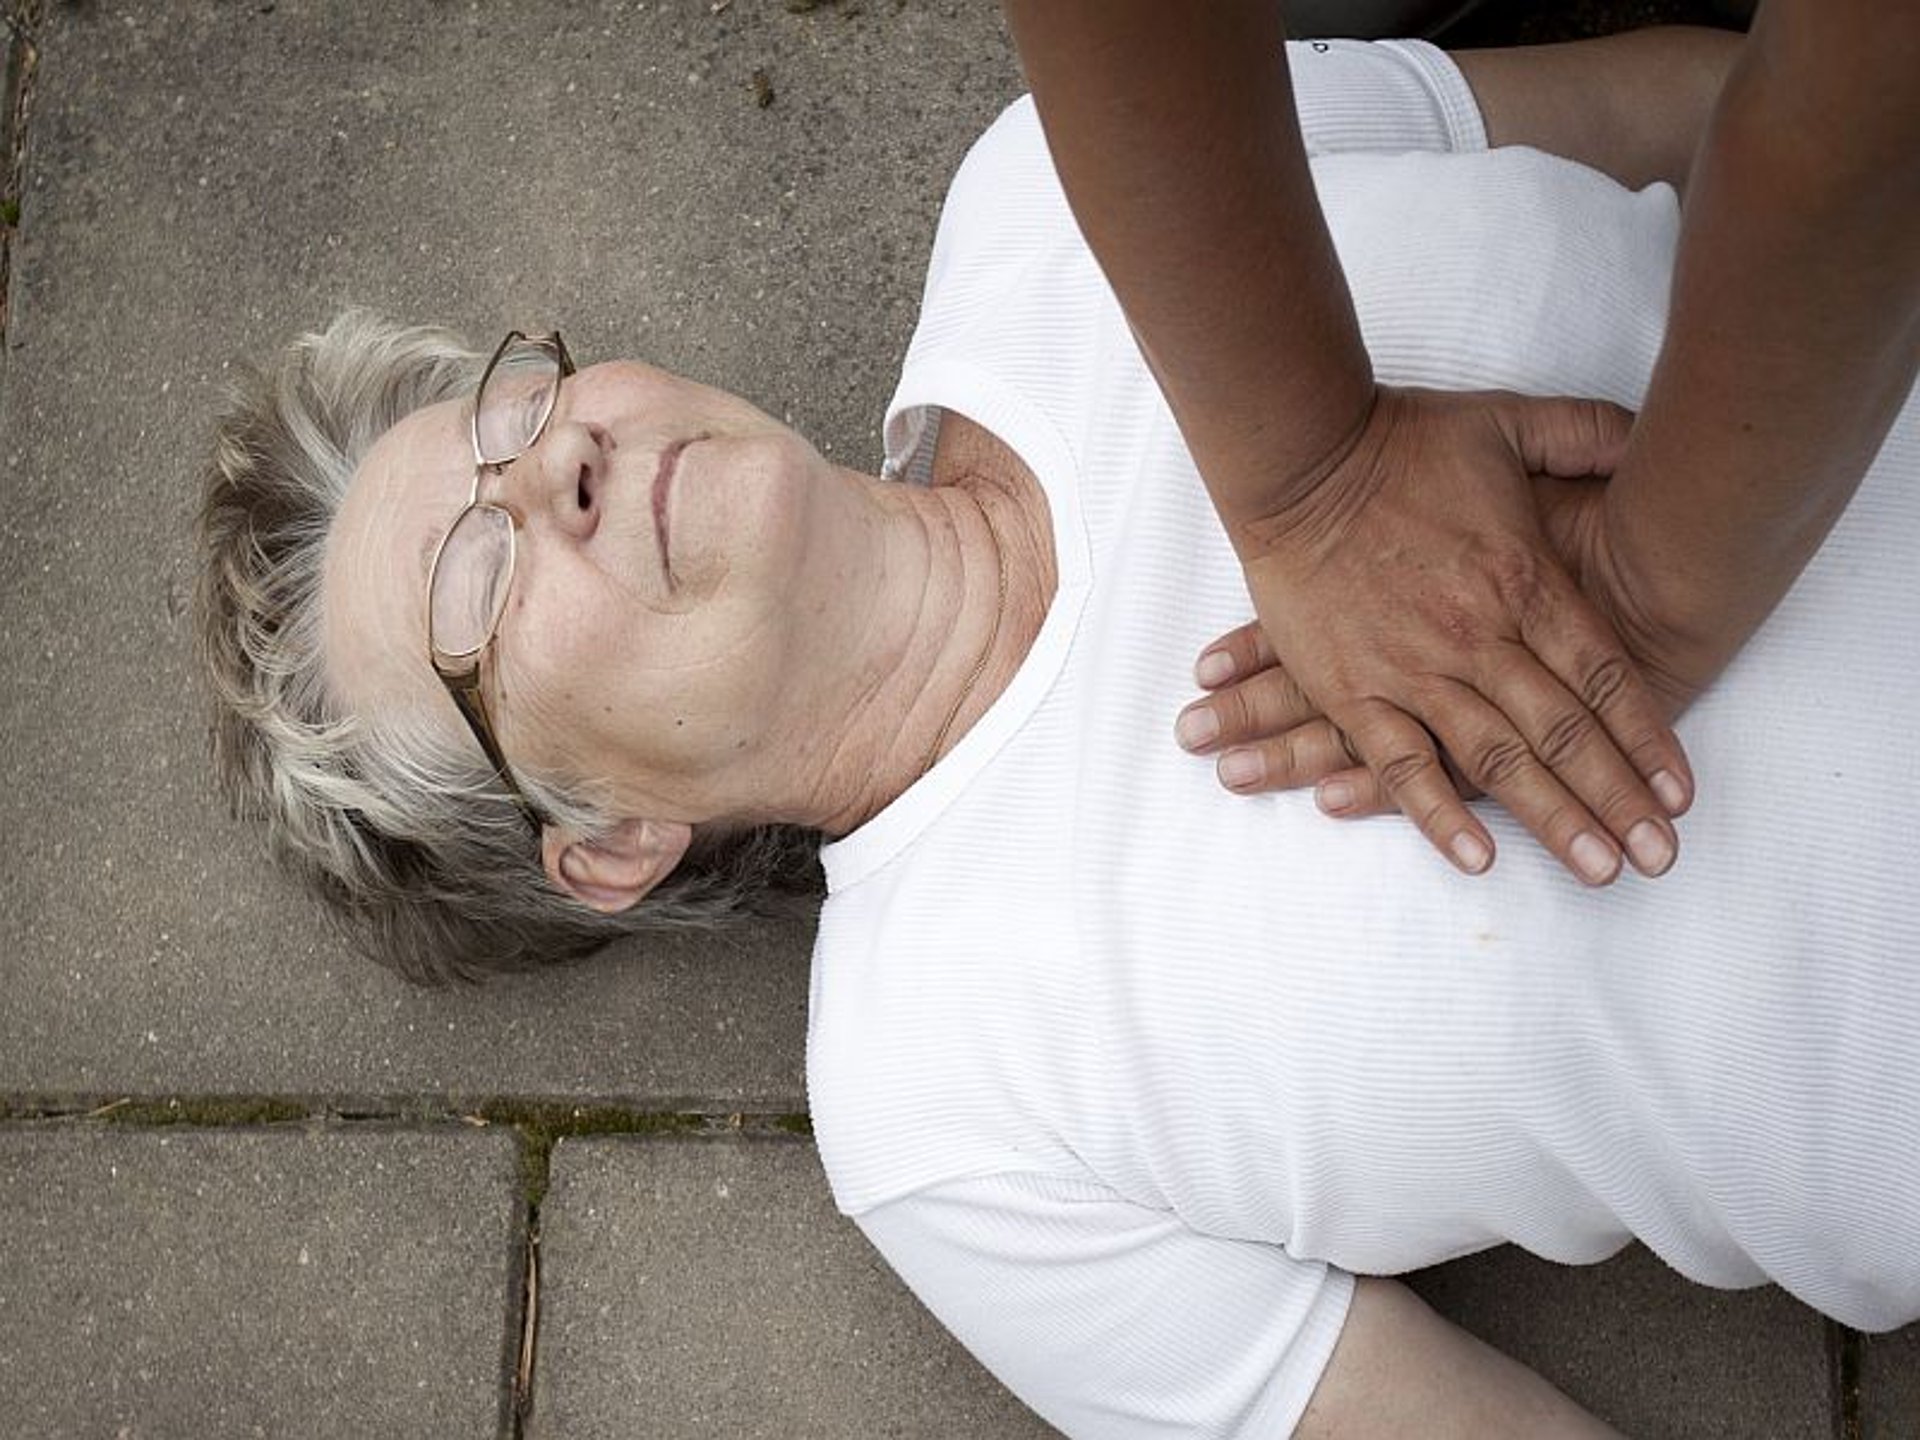 Women Less Likely to Survive Out-of-Hospital Cardiac Arrest thumbnail